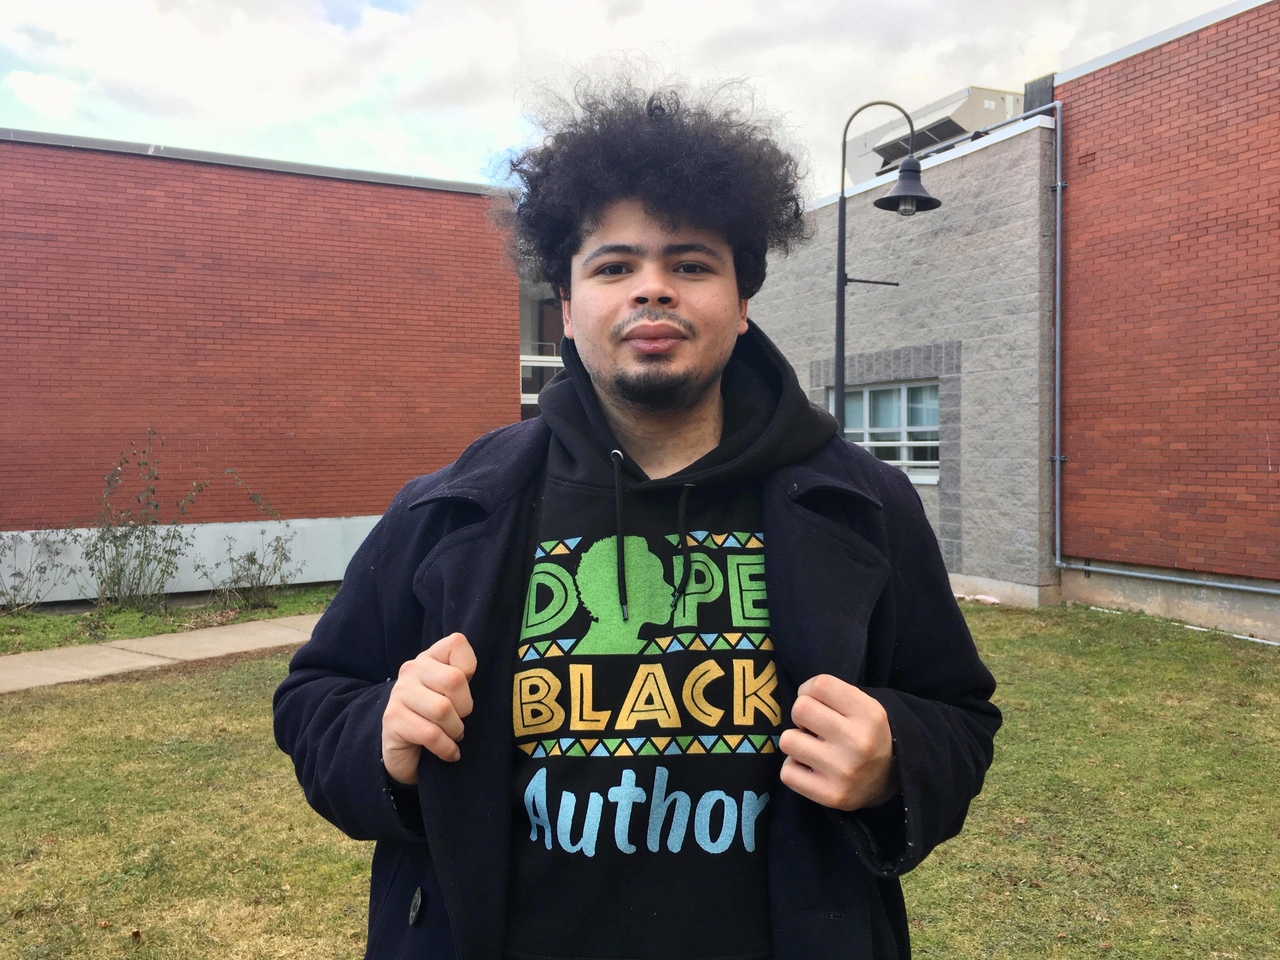 Andre Fenton wearing a hoodie that says "Dope Black Author"